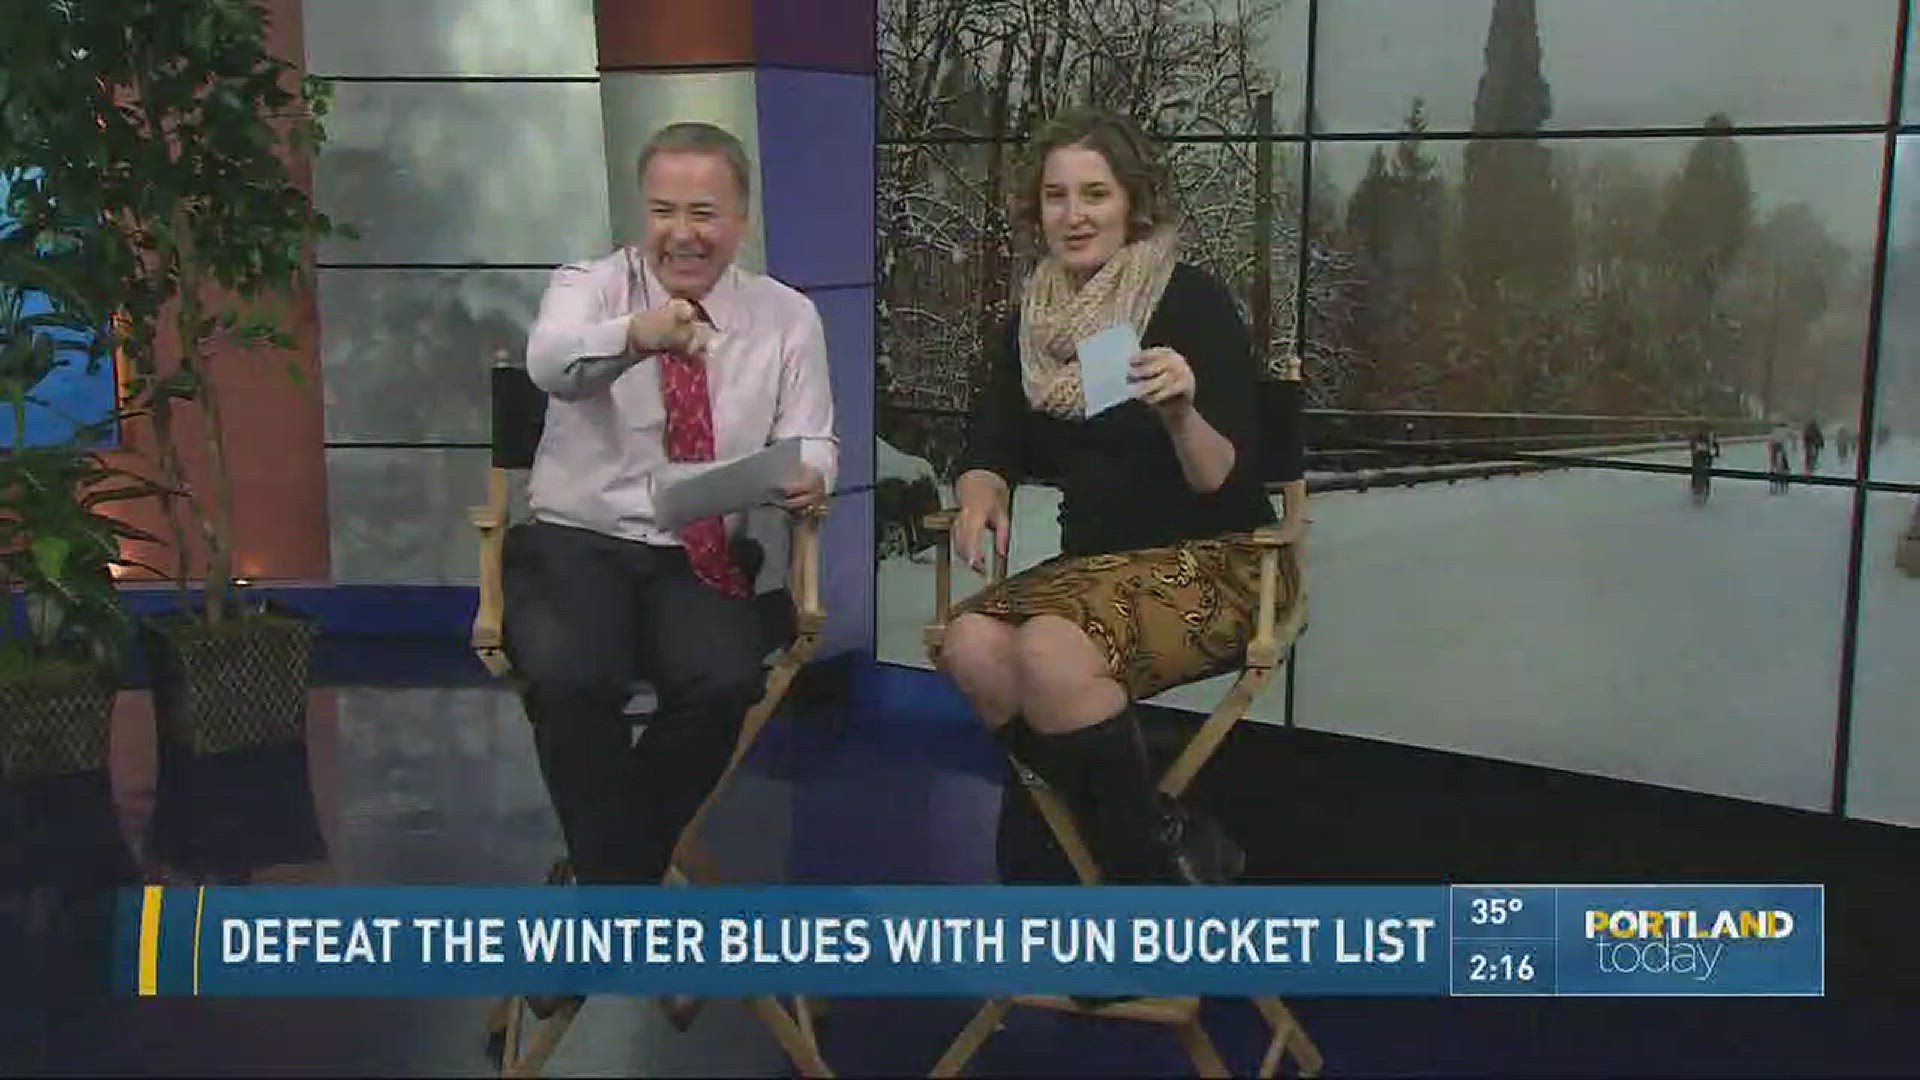 Defeat the winter blues with a fun bucket list